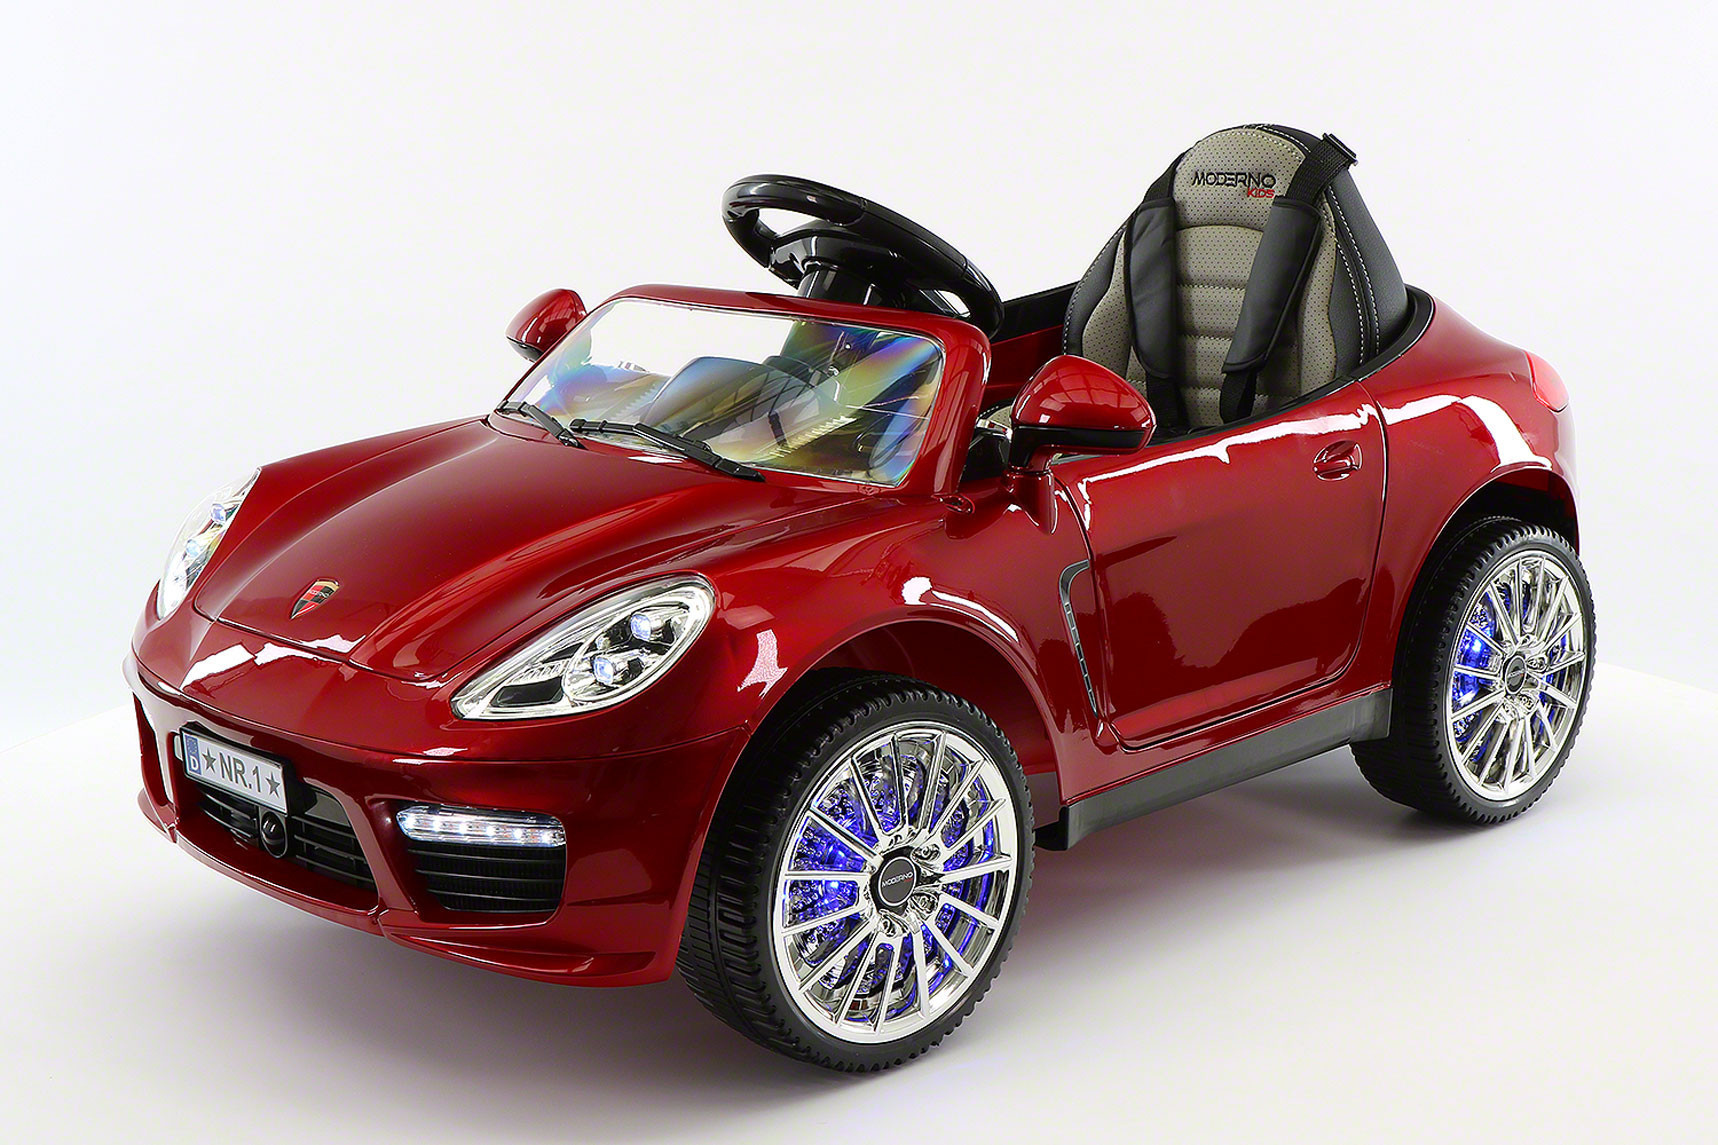 Kiddie Roadster 12V Kids Electric Ride-On Car with R/C Parental Remote | Cherry Red - image 2 of 25